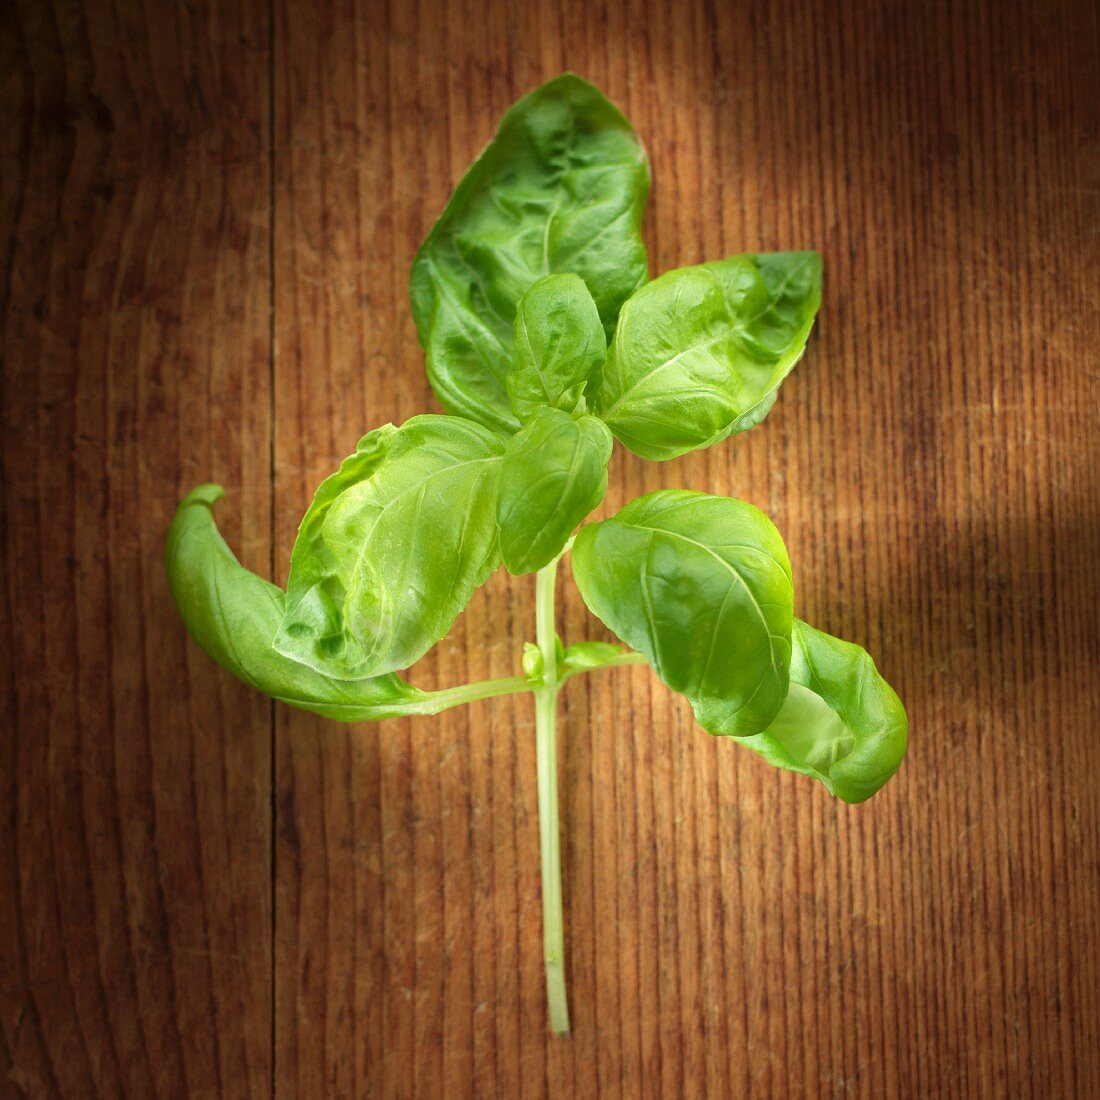 Basil on wooden background